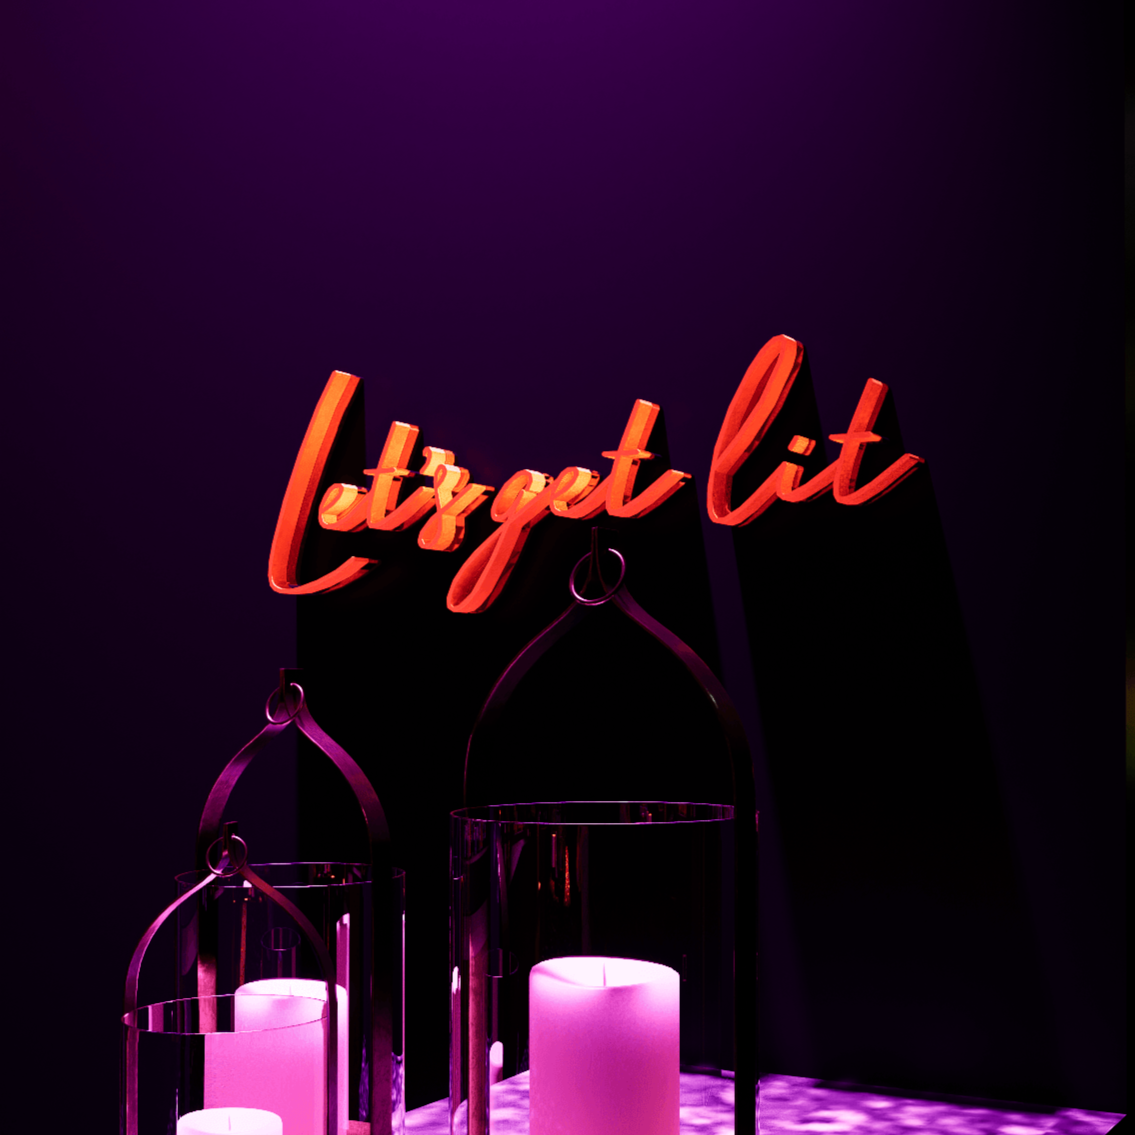 lit-red-neon-lights-hanging-on-the-wall-at-night-let's-get-lit